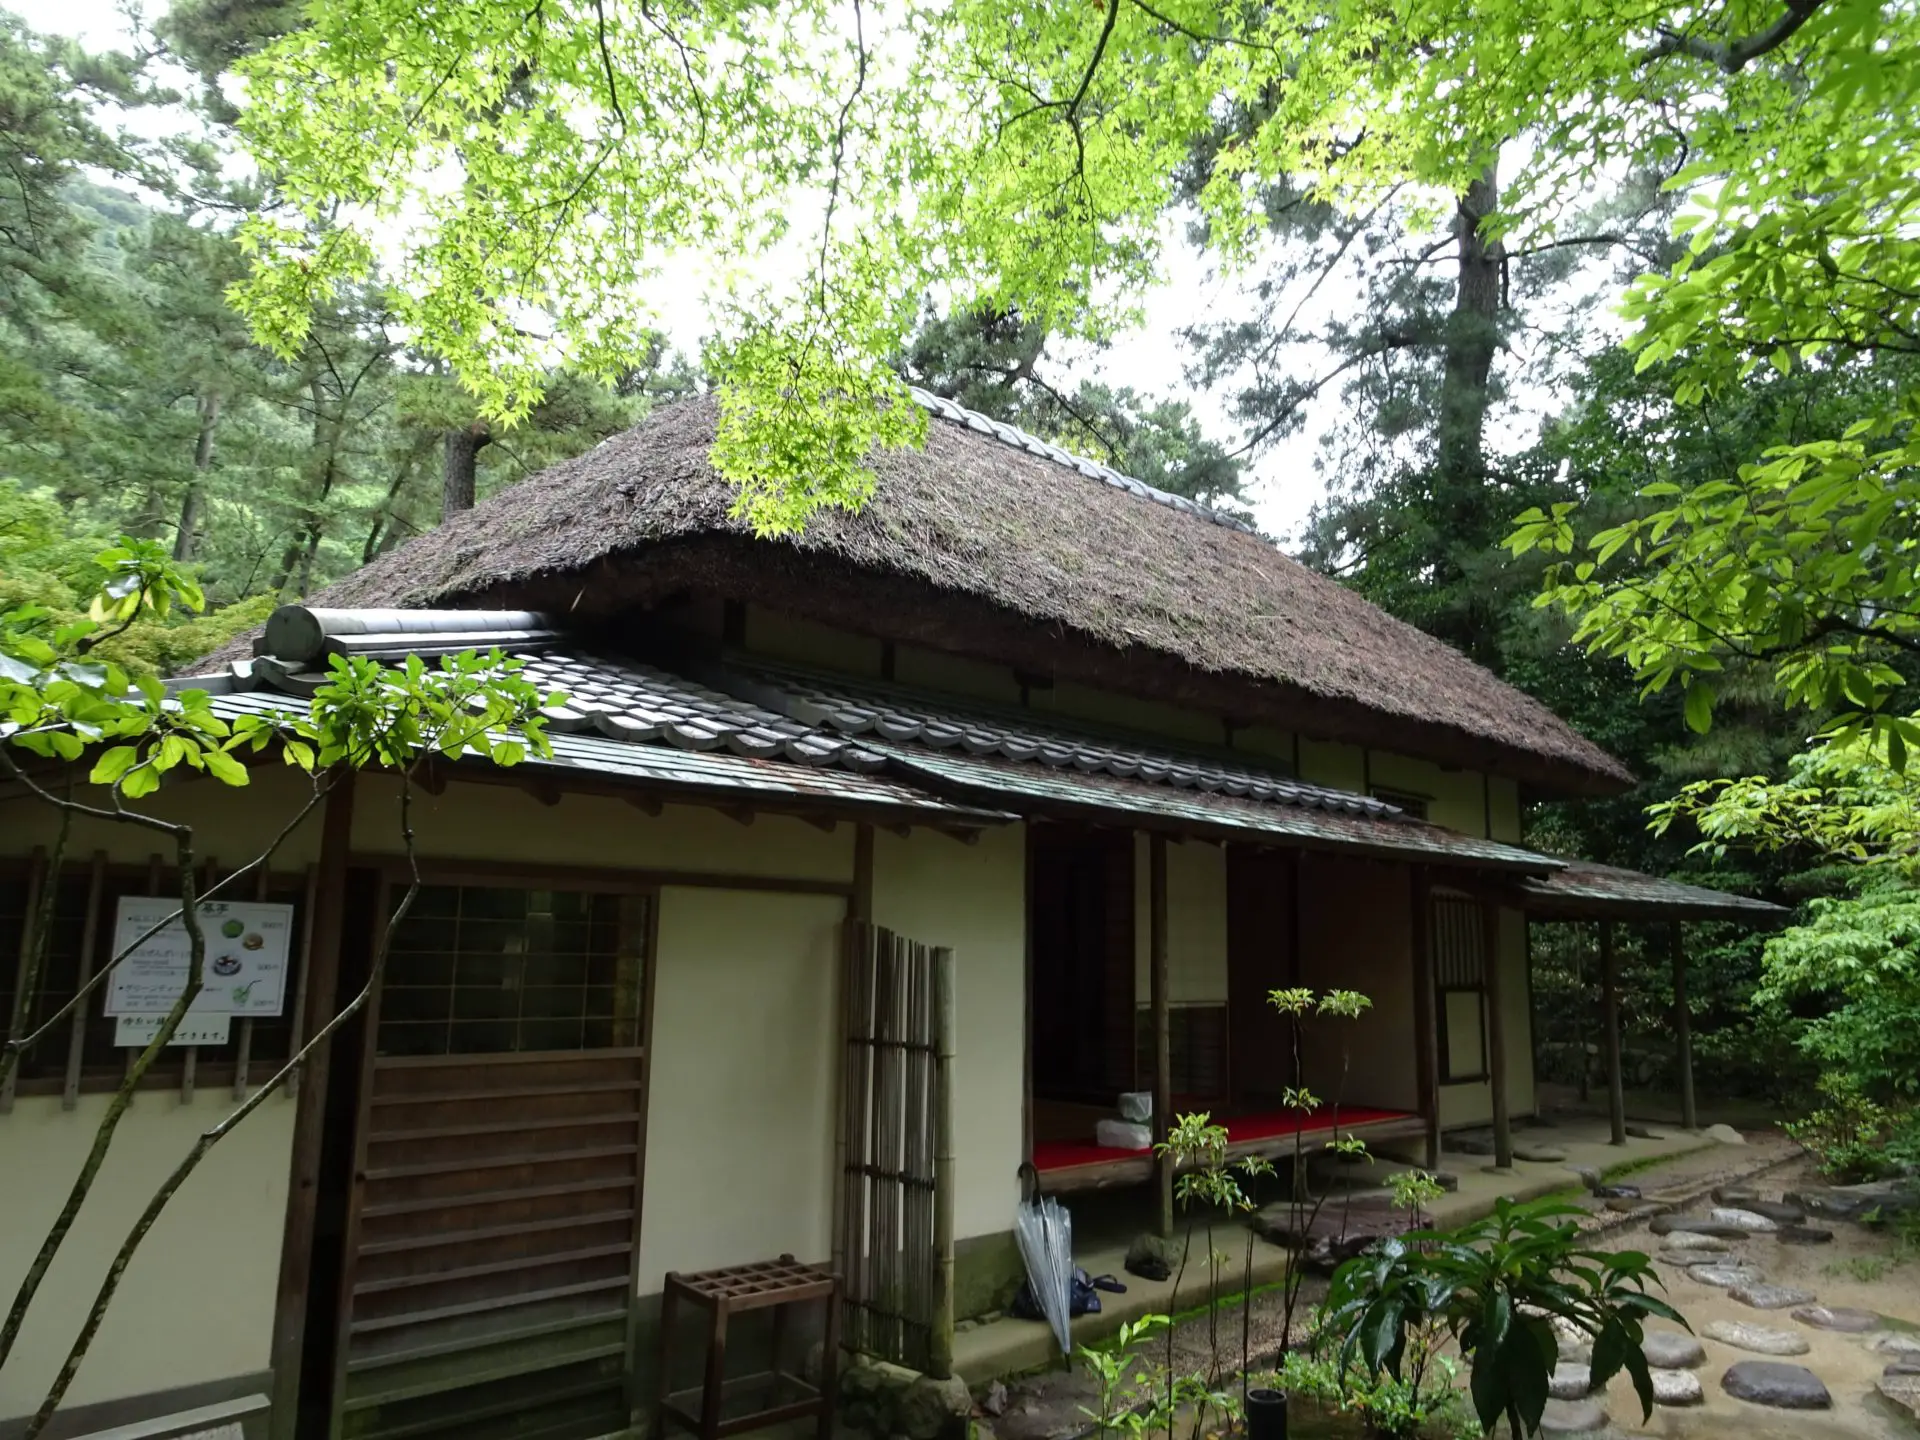 A reet-decked tea house in the forest